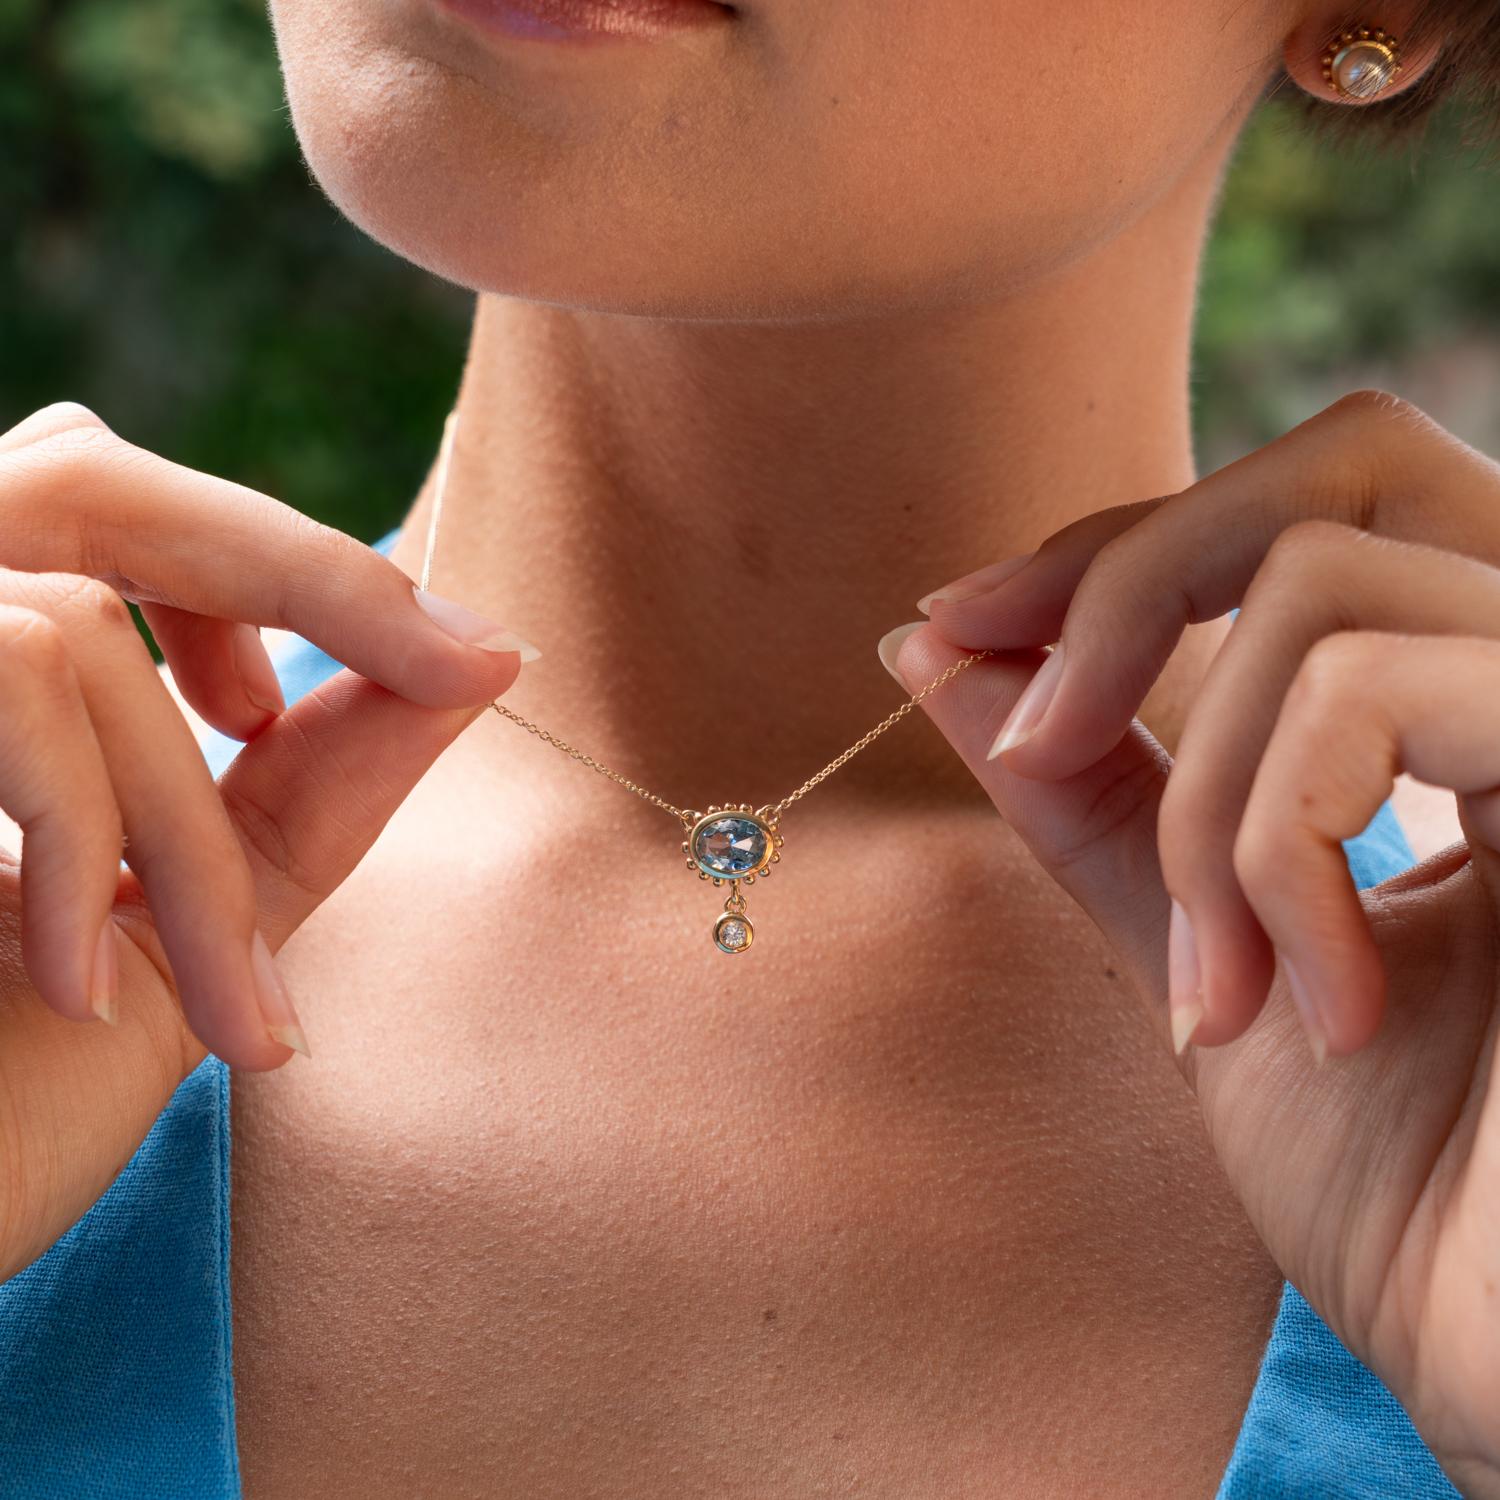 This elegant pendant is set with an oval blue topaz in solid 14k yellow gold. The handcrafted design features granulated spheres adorning the outside of the setting and is complete with a tiny diamond dangling beneath. Inspired by creatures of the